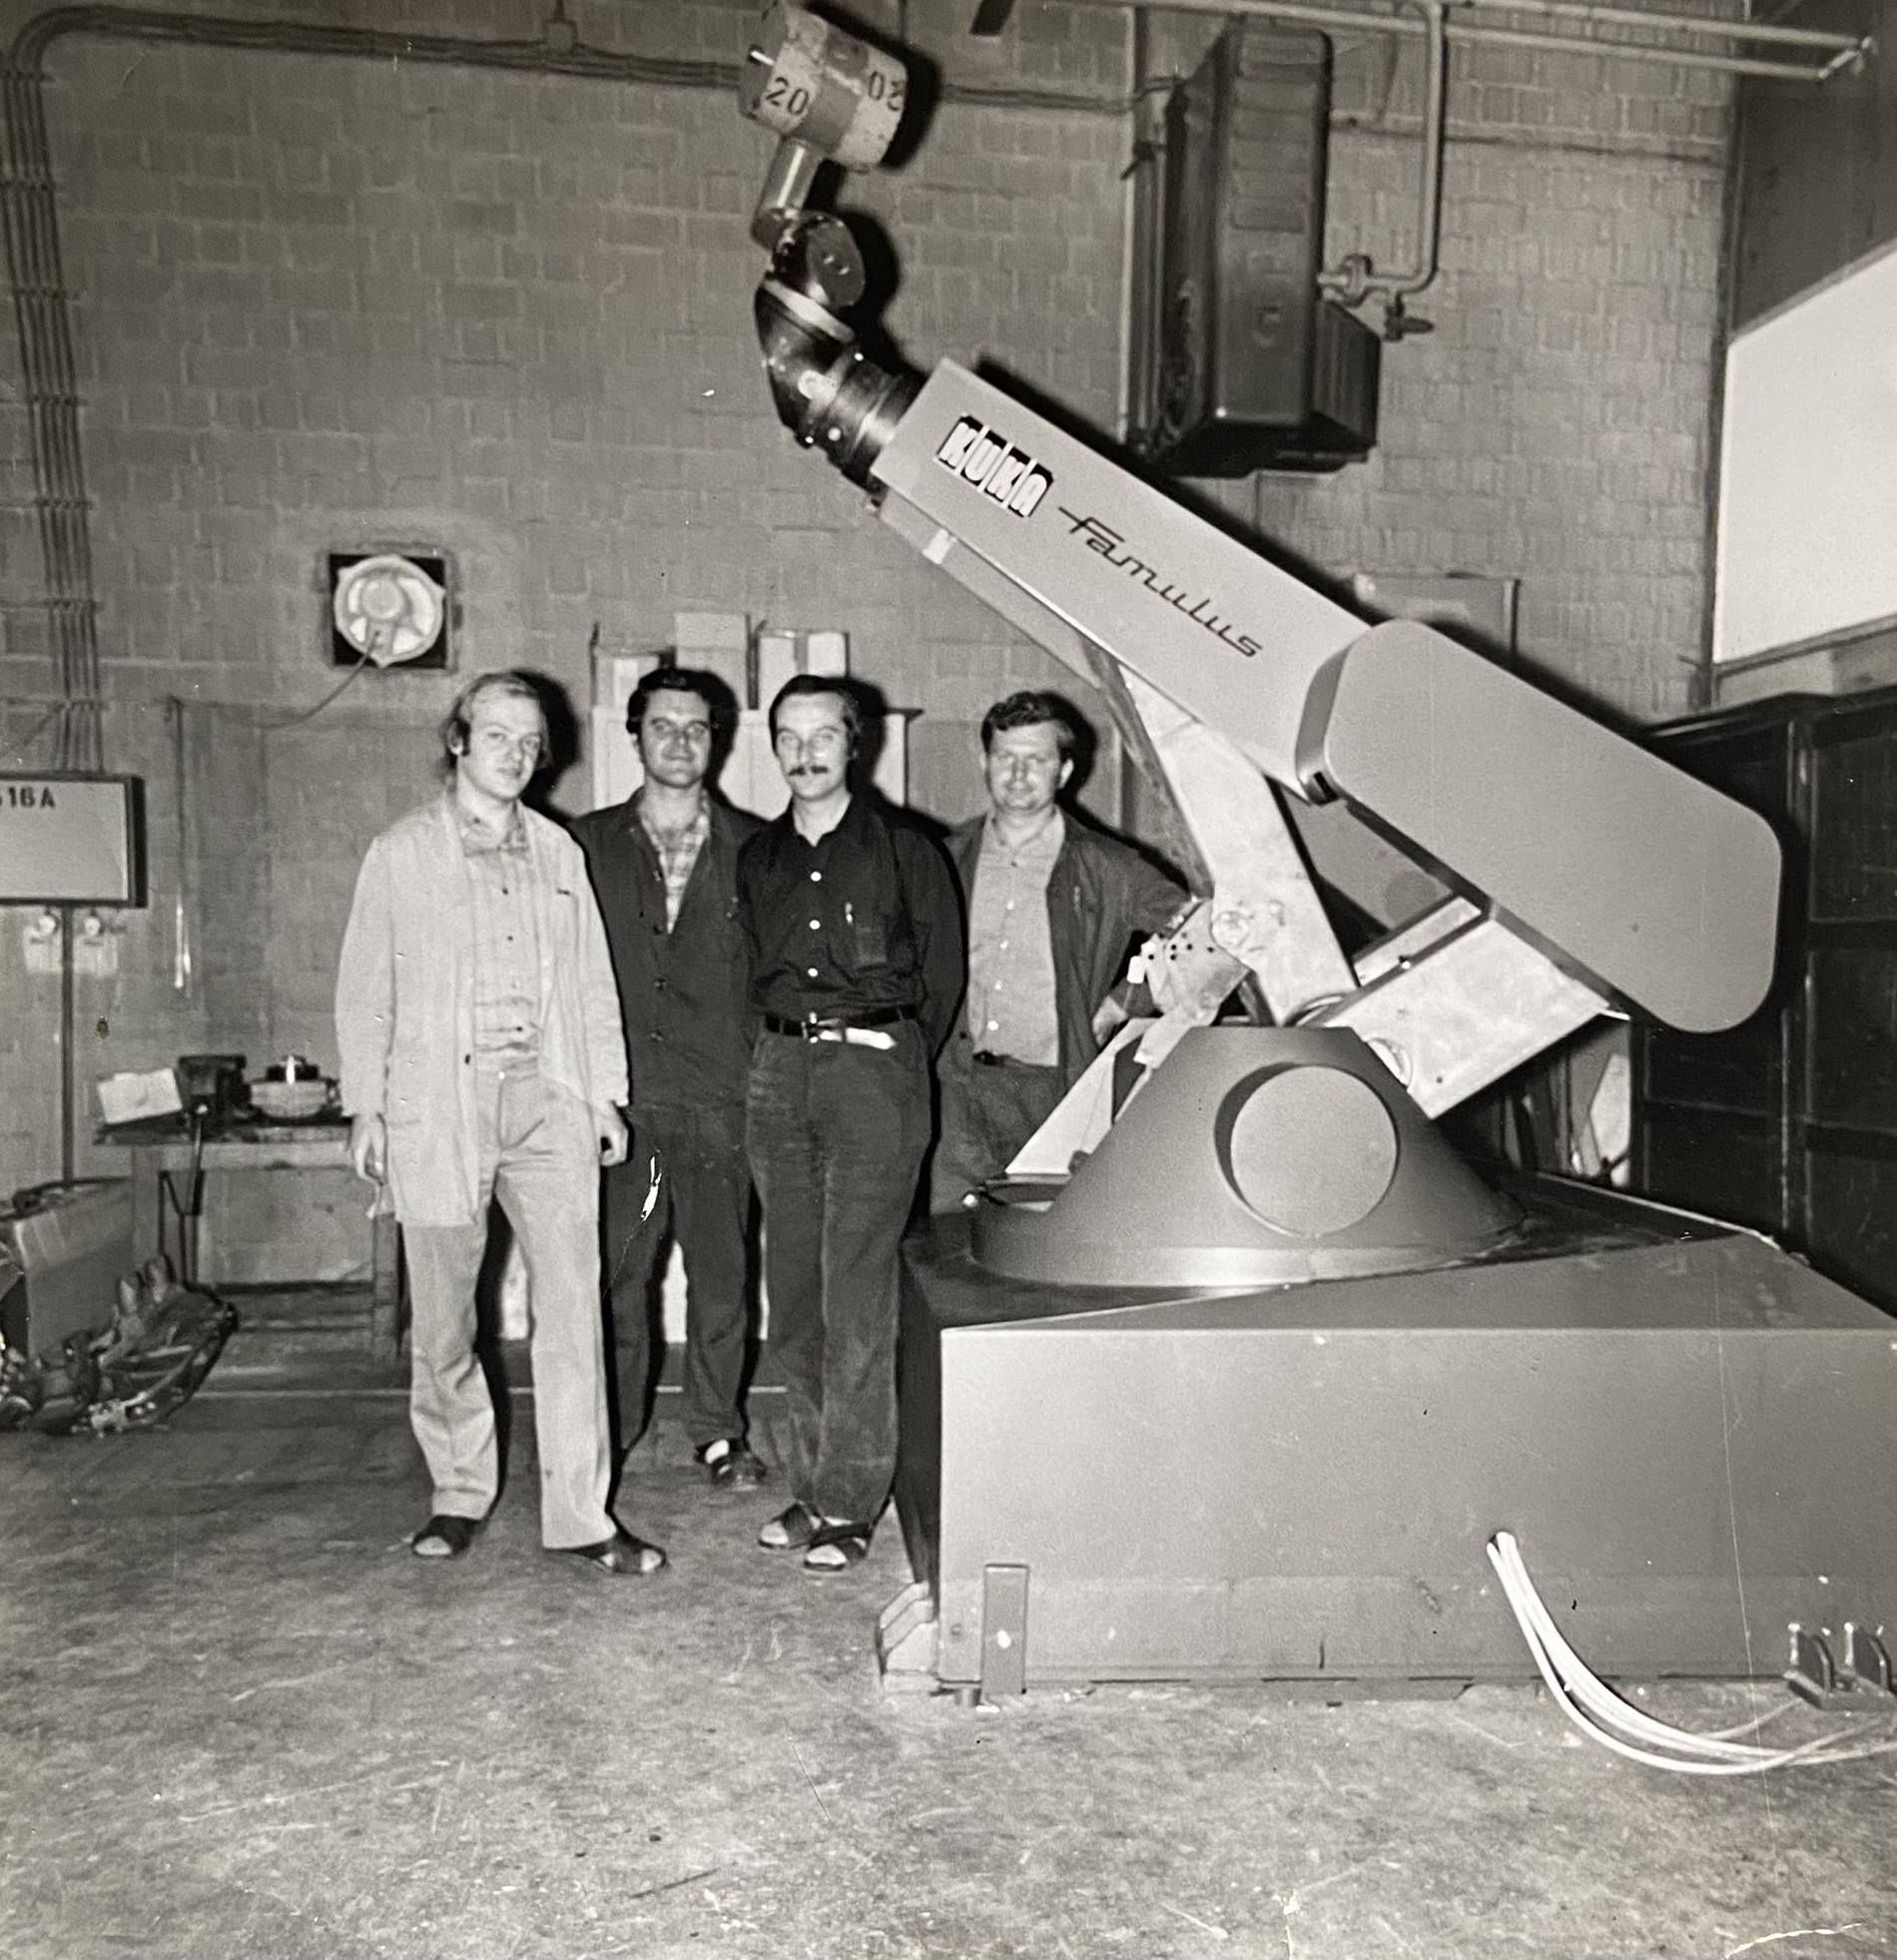 KUKA employees stand in front of the KUKA Famulus, with which the Augsburg-based automation specialist wrote history as a robotics pioneer in 1973. 